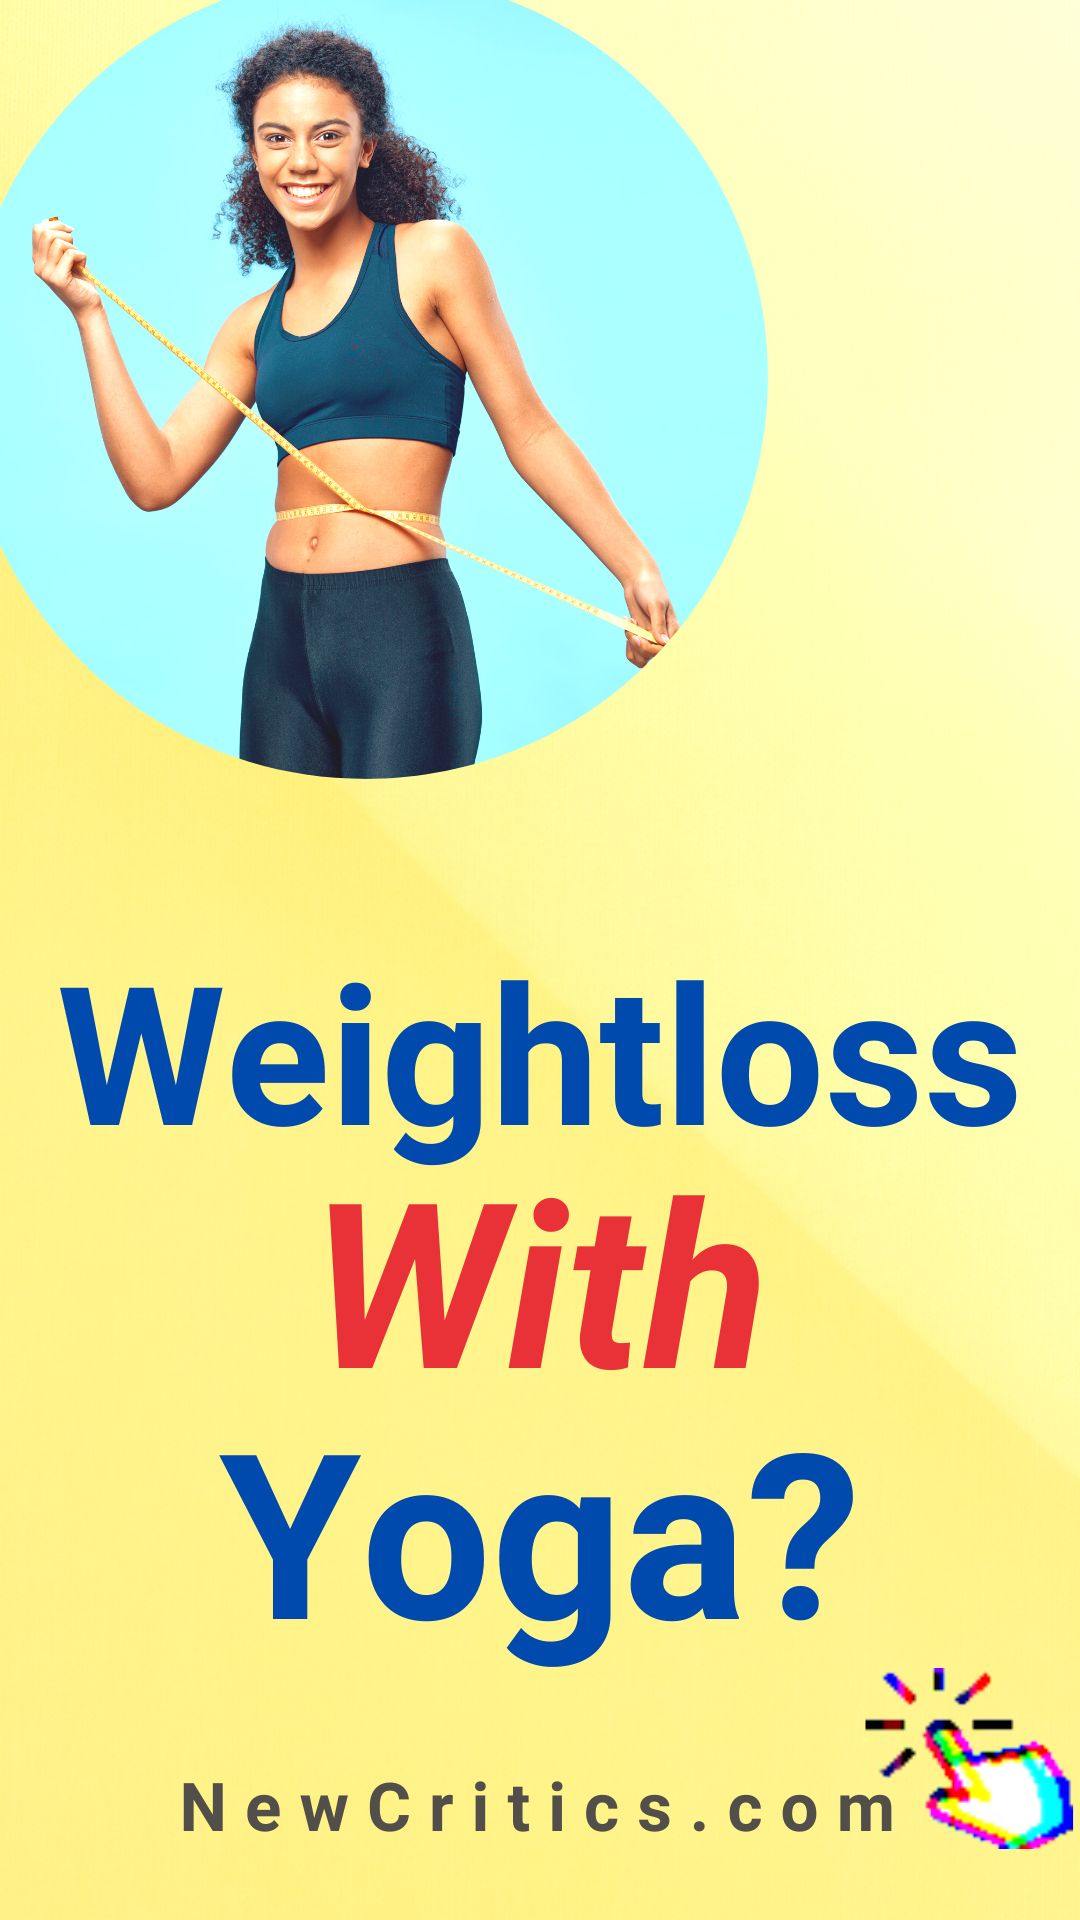 Weightloss With Yoga / Canva